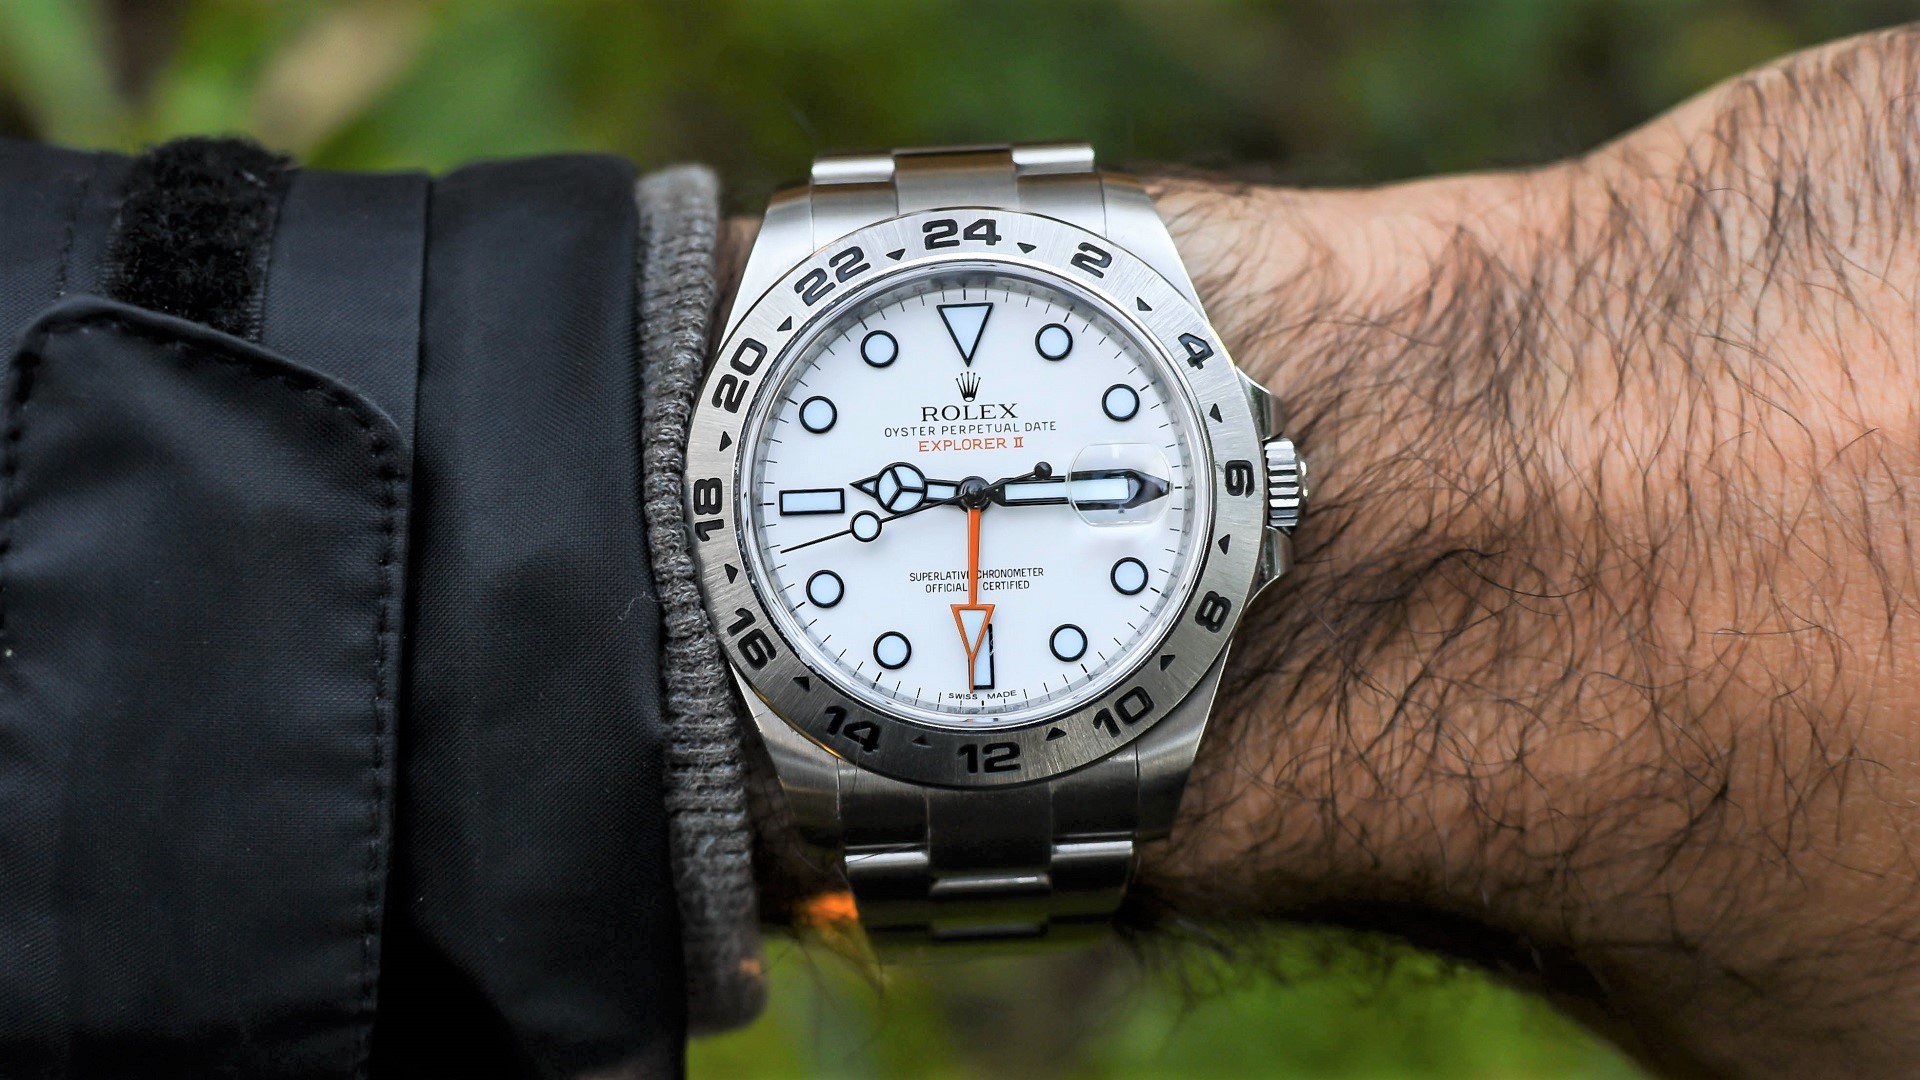 Rolex Explorer II Polar Watch 01 - aBlogtoWatch Editors On The Favorite Watch Added To Our Coll...